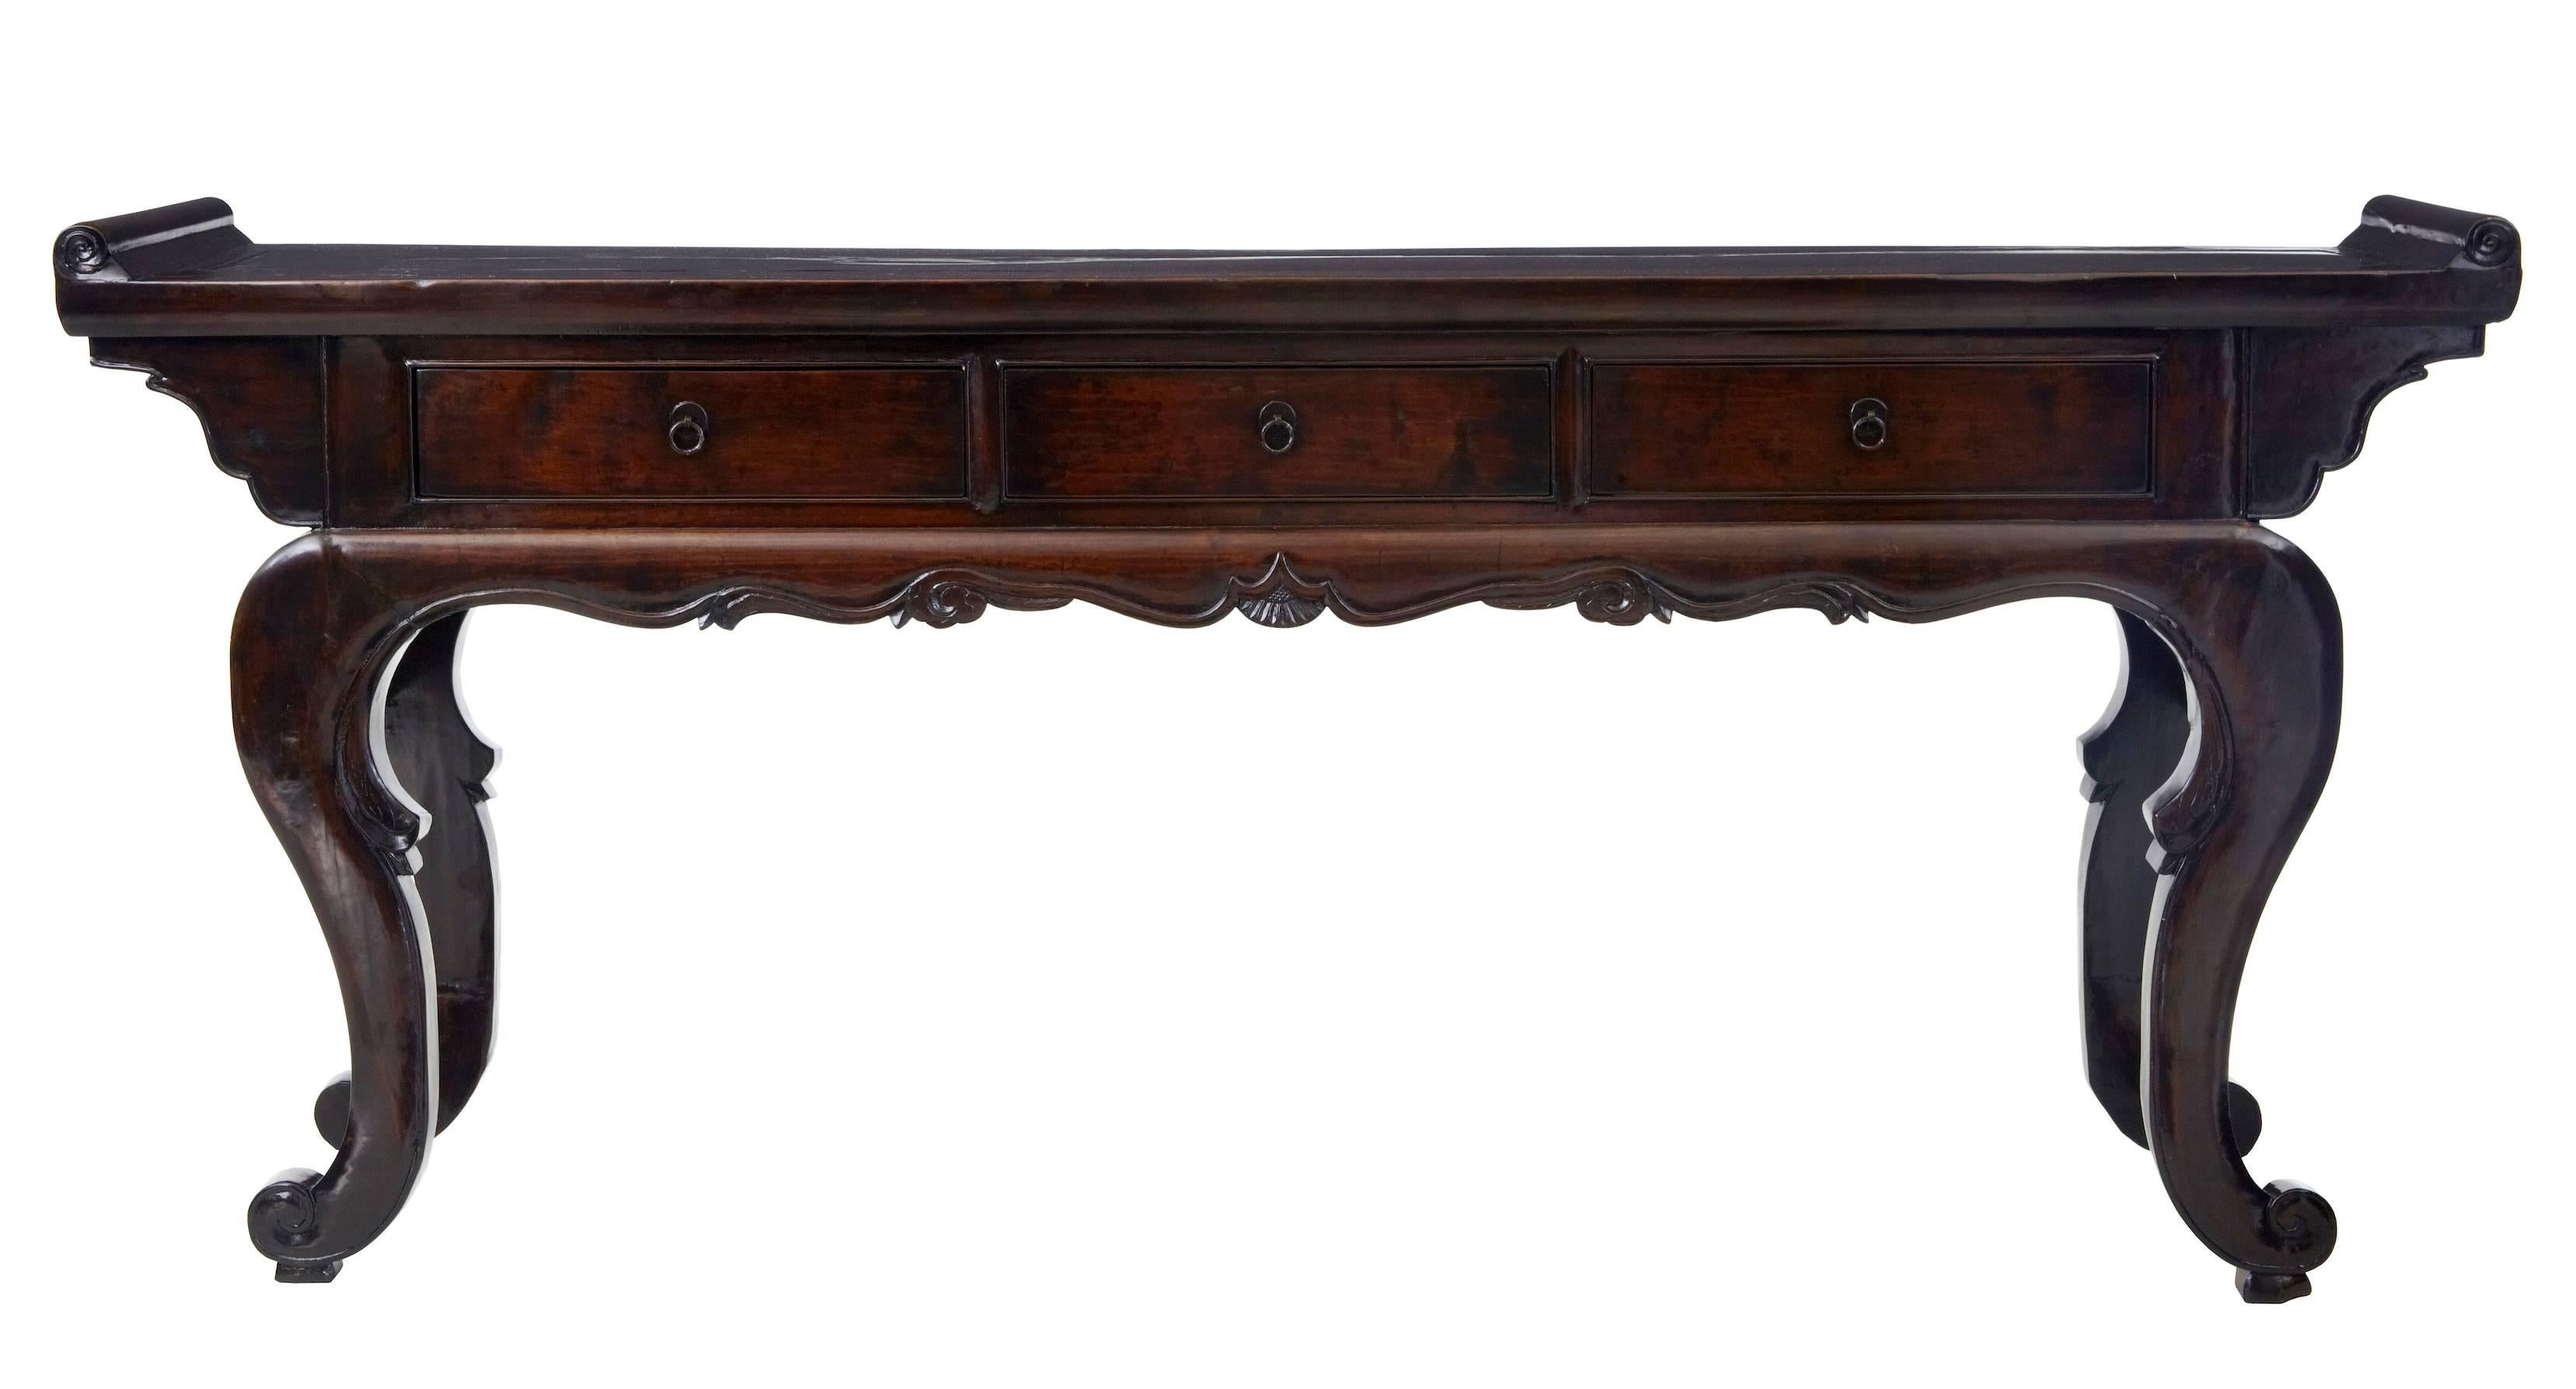 Excellent quality dresser base, circa 1870.
Three-drawer dresser base.
Scrolled rollover top, carved shaped apron. Standing on four scroll legs.
Some minor wear to lacquer.

Measures: Height 35 3/4